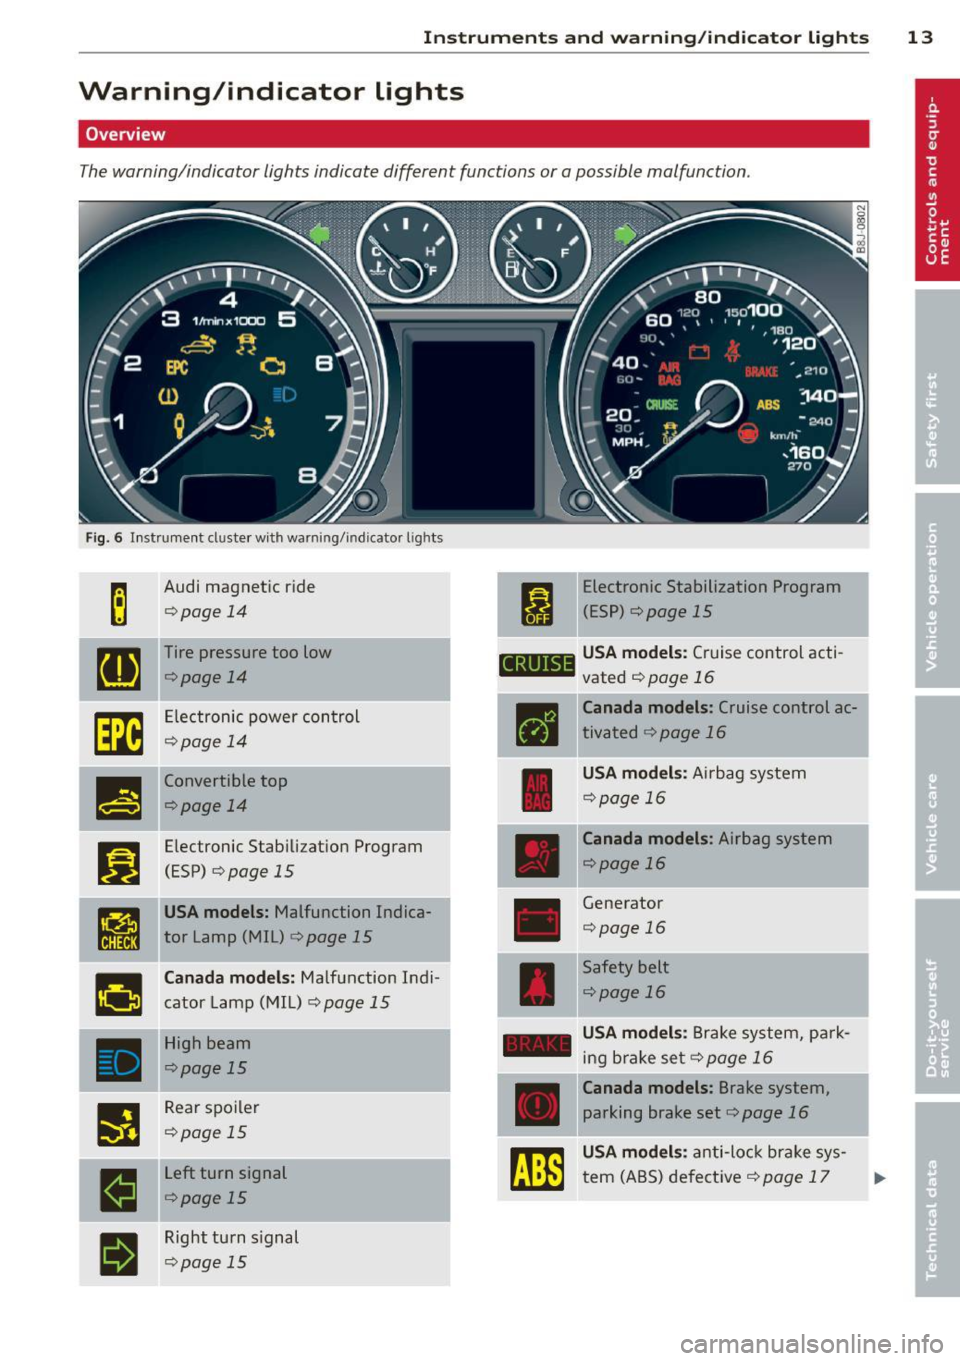 AUDI TT ROADSTER 2011  Owners Manual Instrument s  and  warning /indicator  lights  13 
Warning/indicator  lights 
Overview 
The warning/indicator  lights  indicate  different  functions  or  a possible  malfunction . 
Fig. 6 In str um e